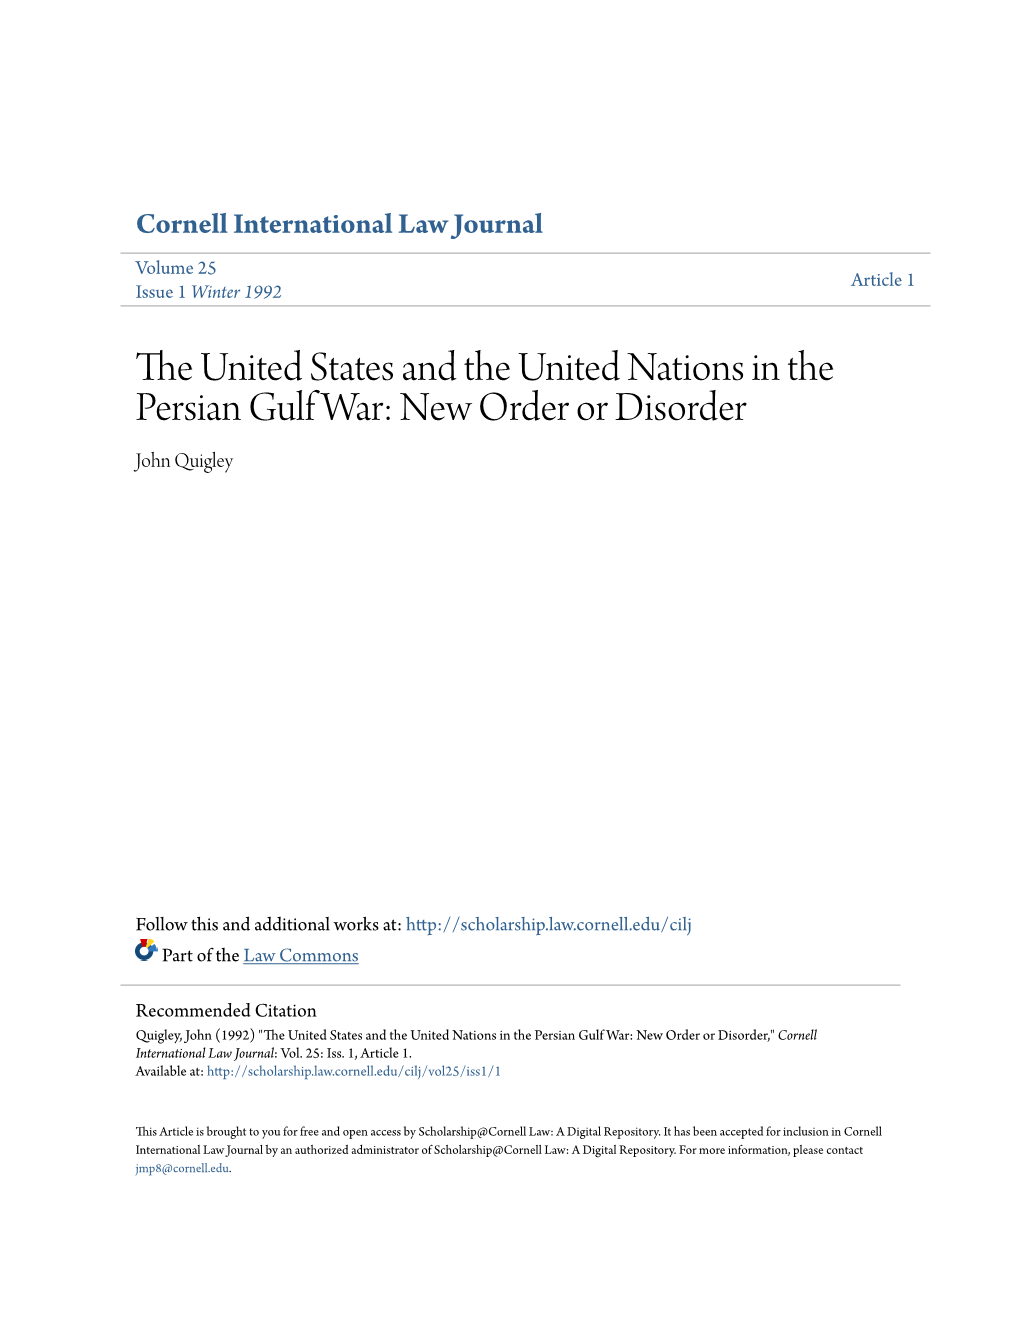 The United States and the United Nations in the Persian Gulf War: New Order Or Disorder?